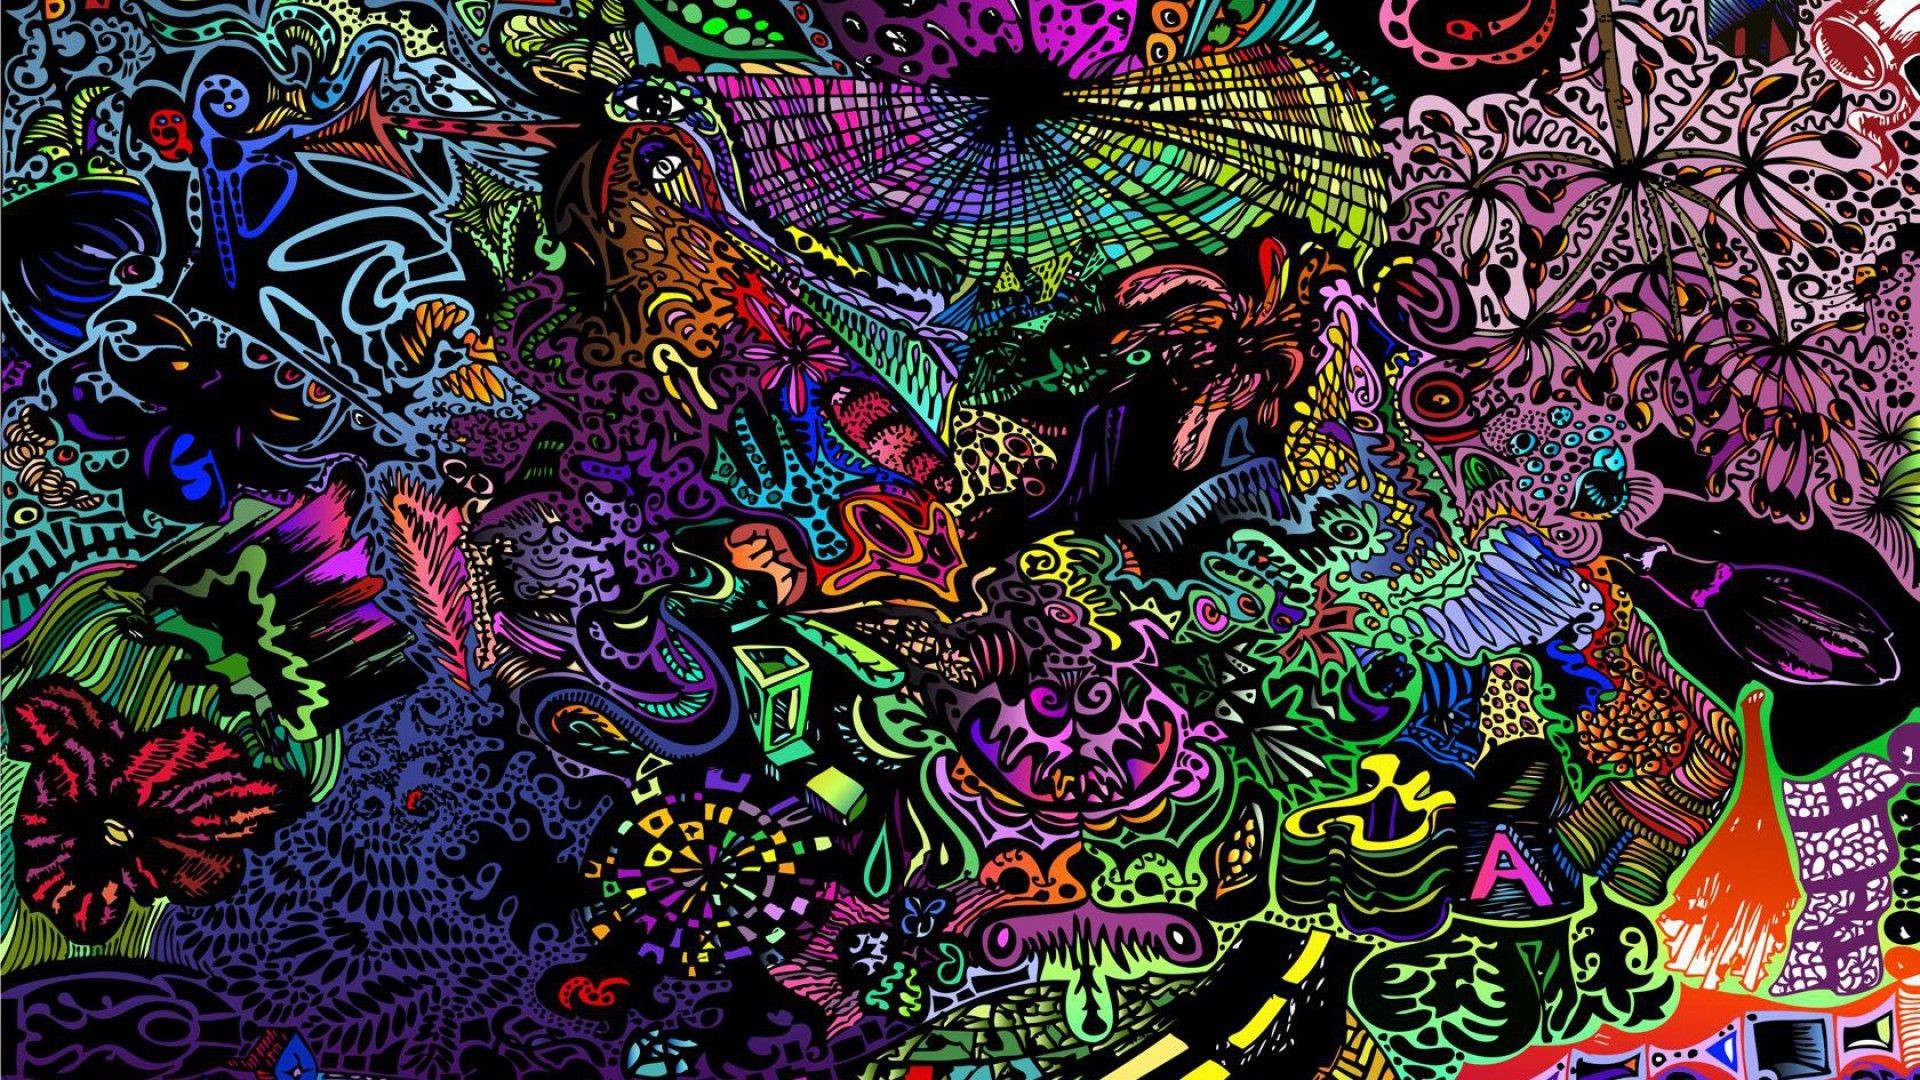 1920x1080 ... Design Wallpaper HD - Trippy Space Wallpaper High Definition at .